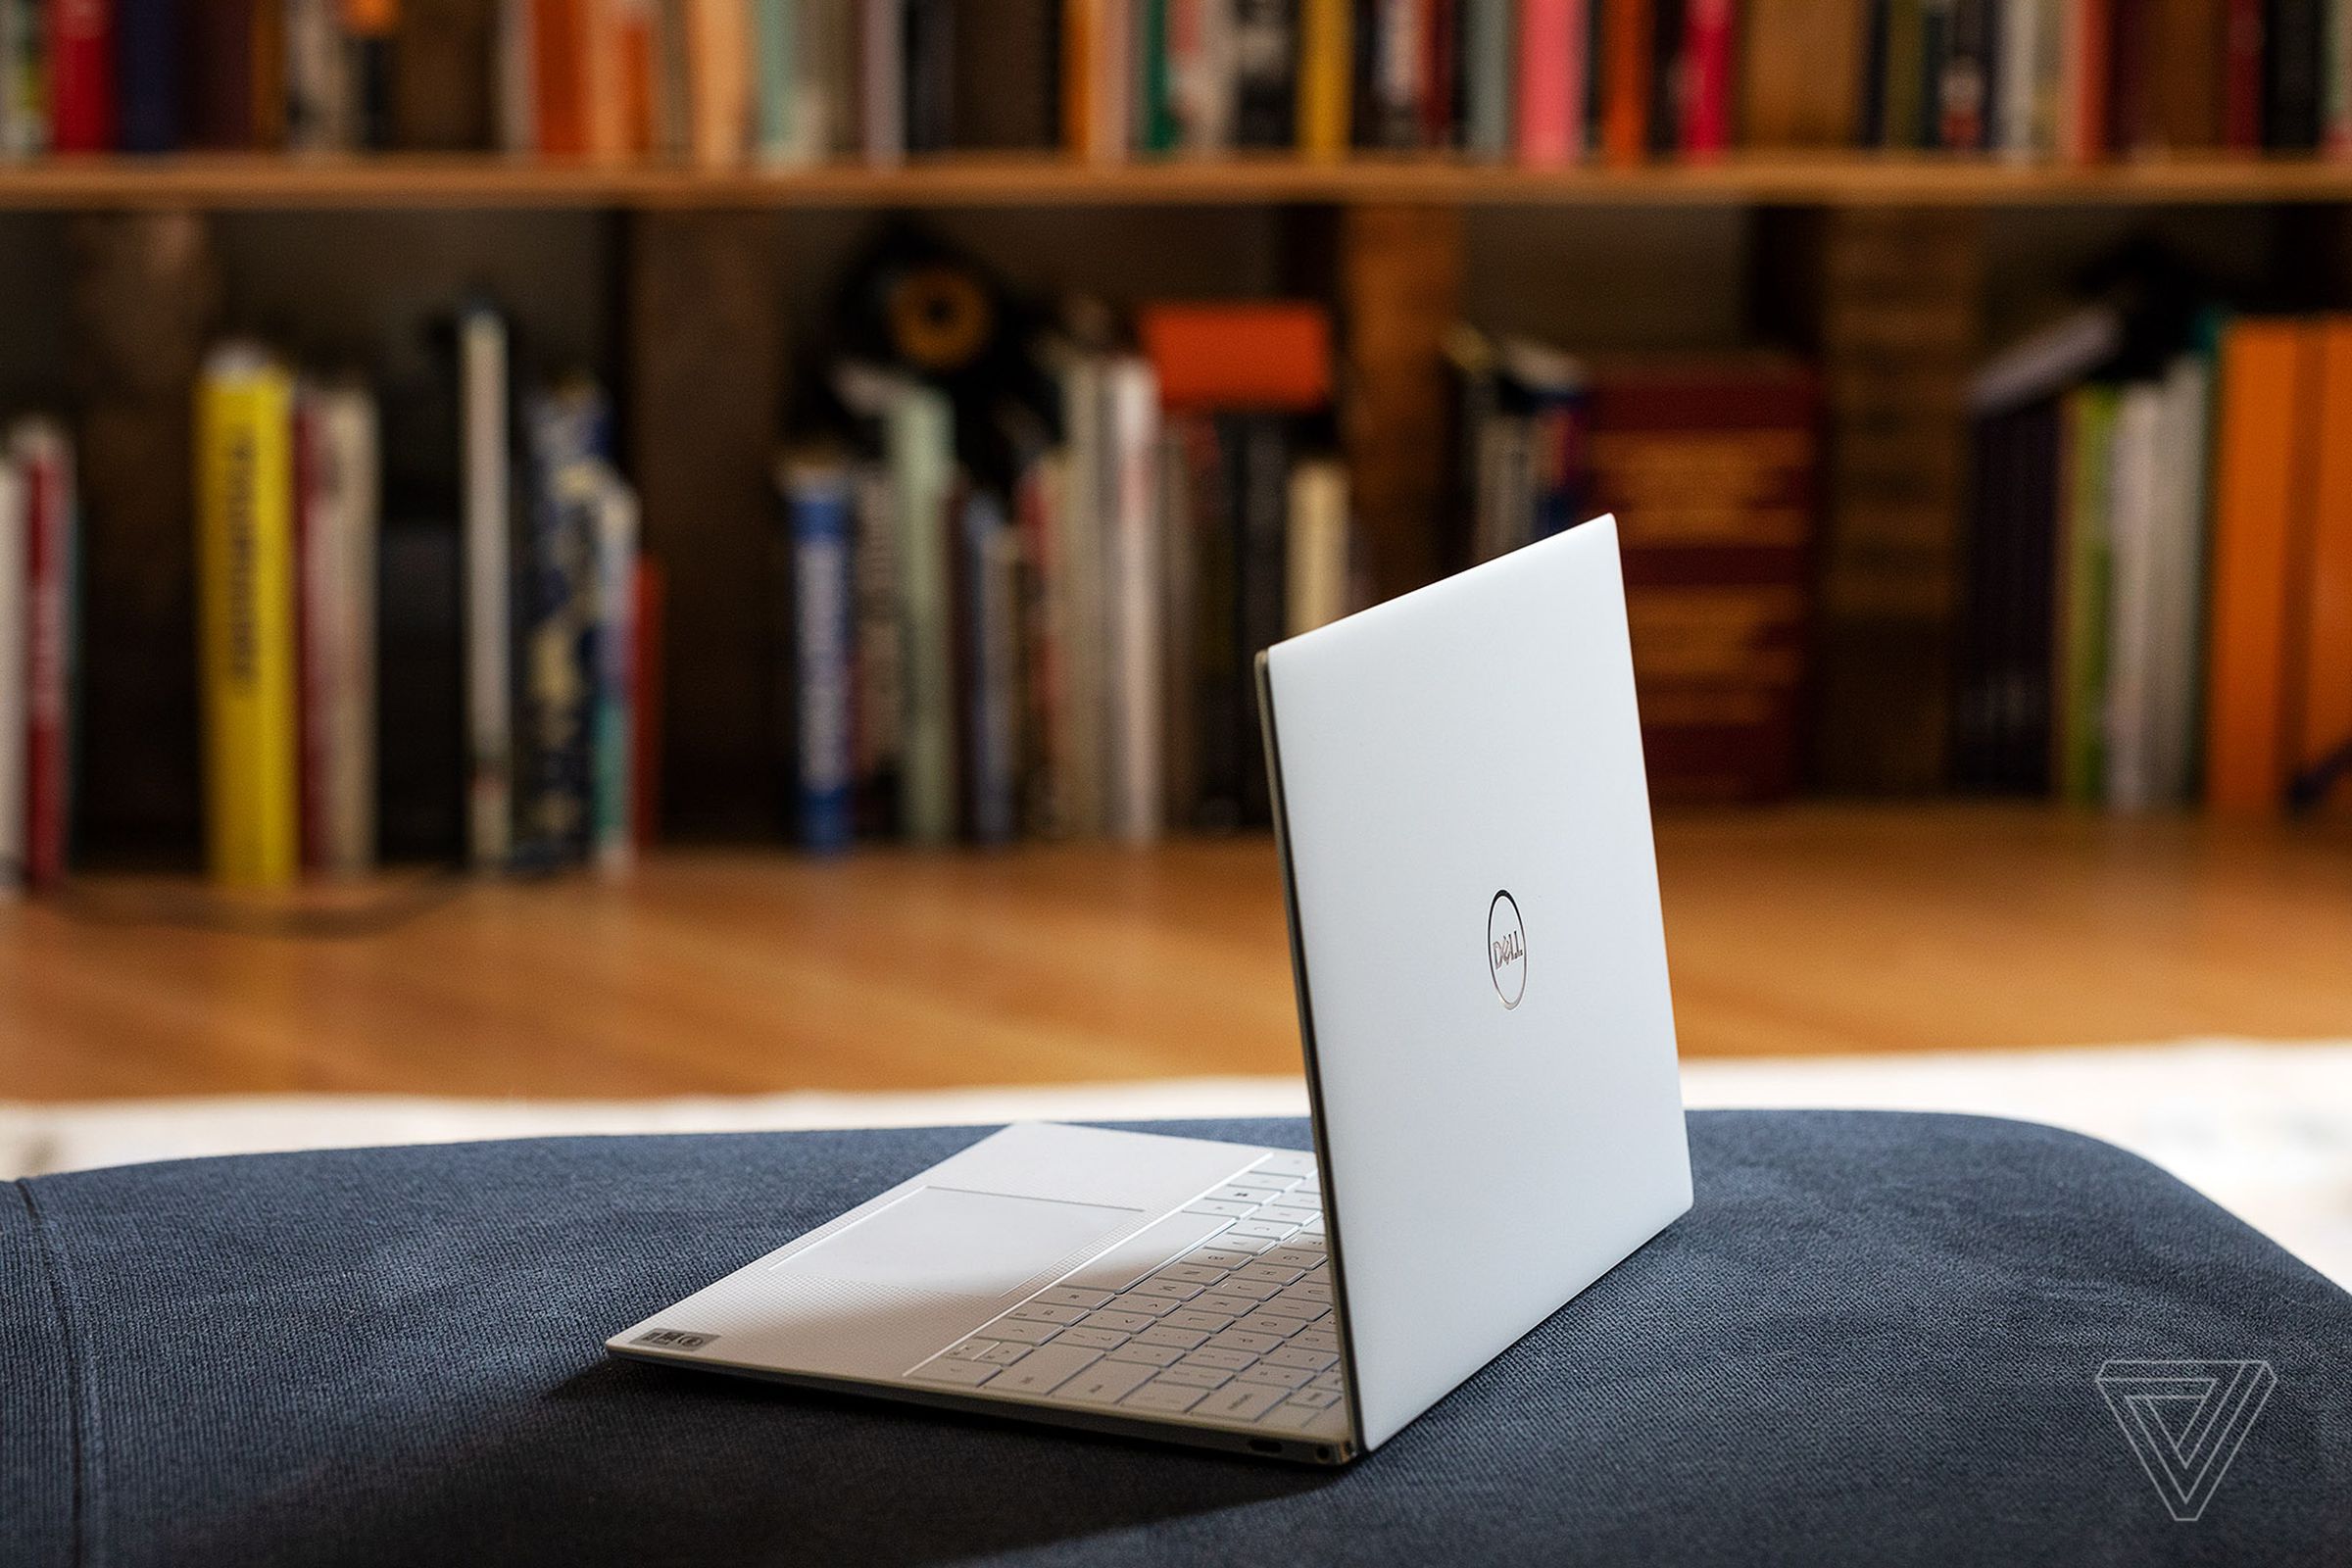 The Dell XPS 13 is one of the best laptops for high school and college students.